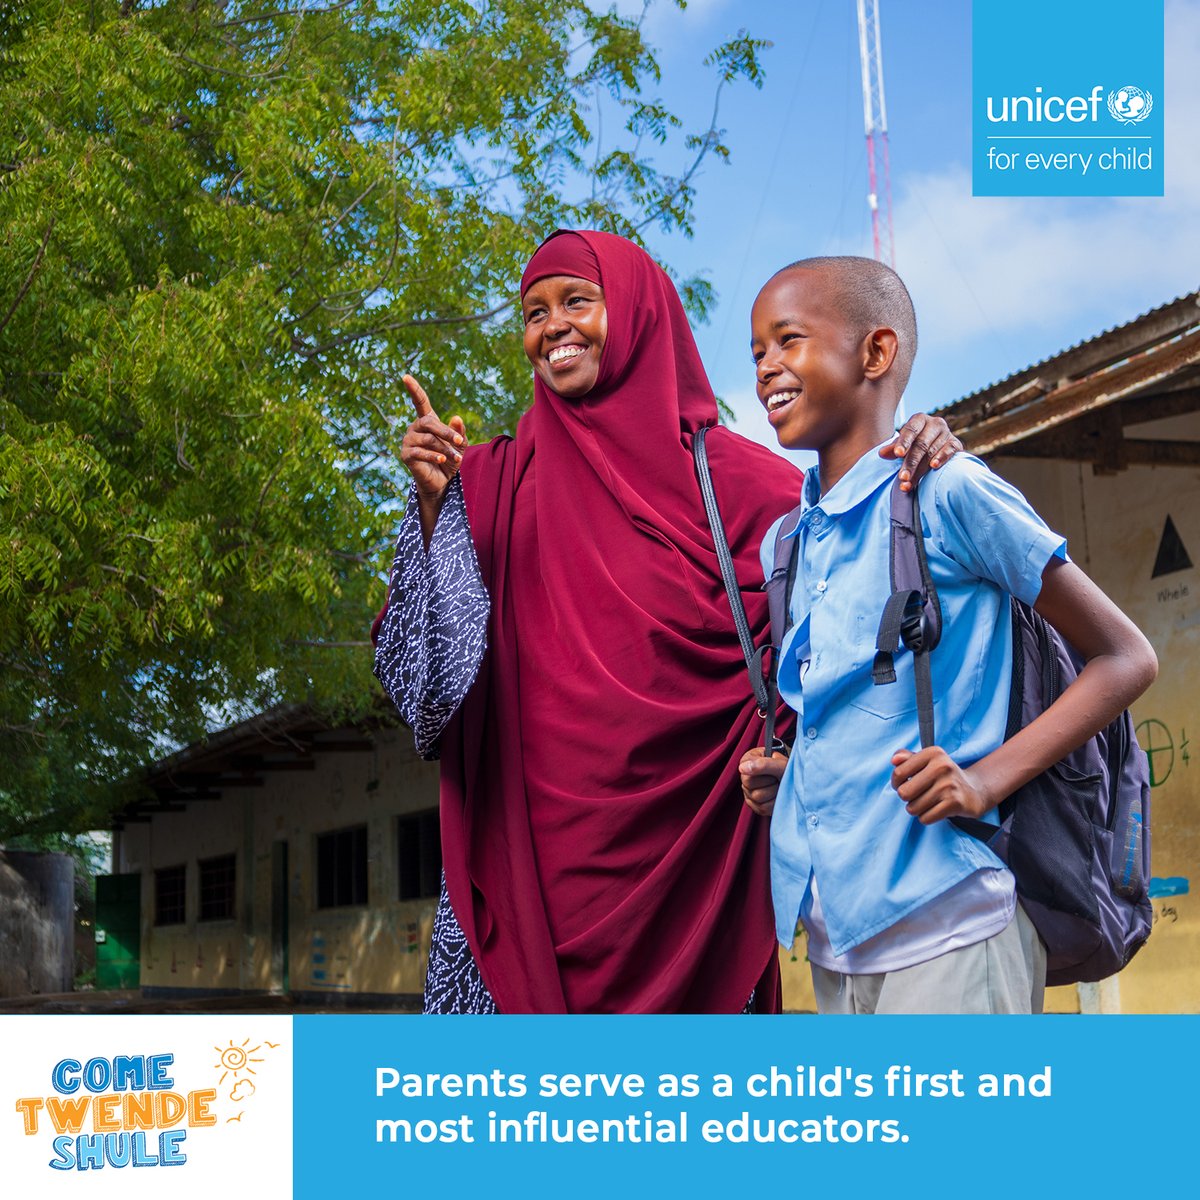 Parents serve as a child's first & most influential educators. ​

We are working with @UNICEF_Kenya to encourage parents to support their children's education.
Join us on the #MakalaYaTumaini​ show to learn more.​

#ComeTwendeShule​
@EduMinKenya  @CBCC_Africa